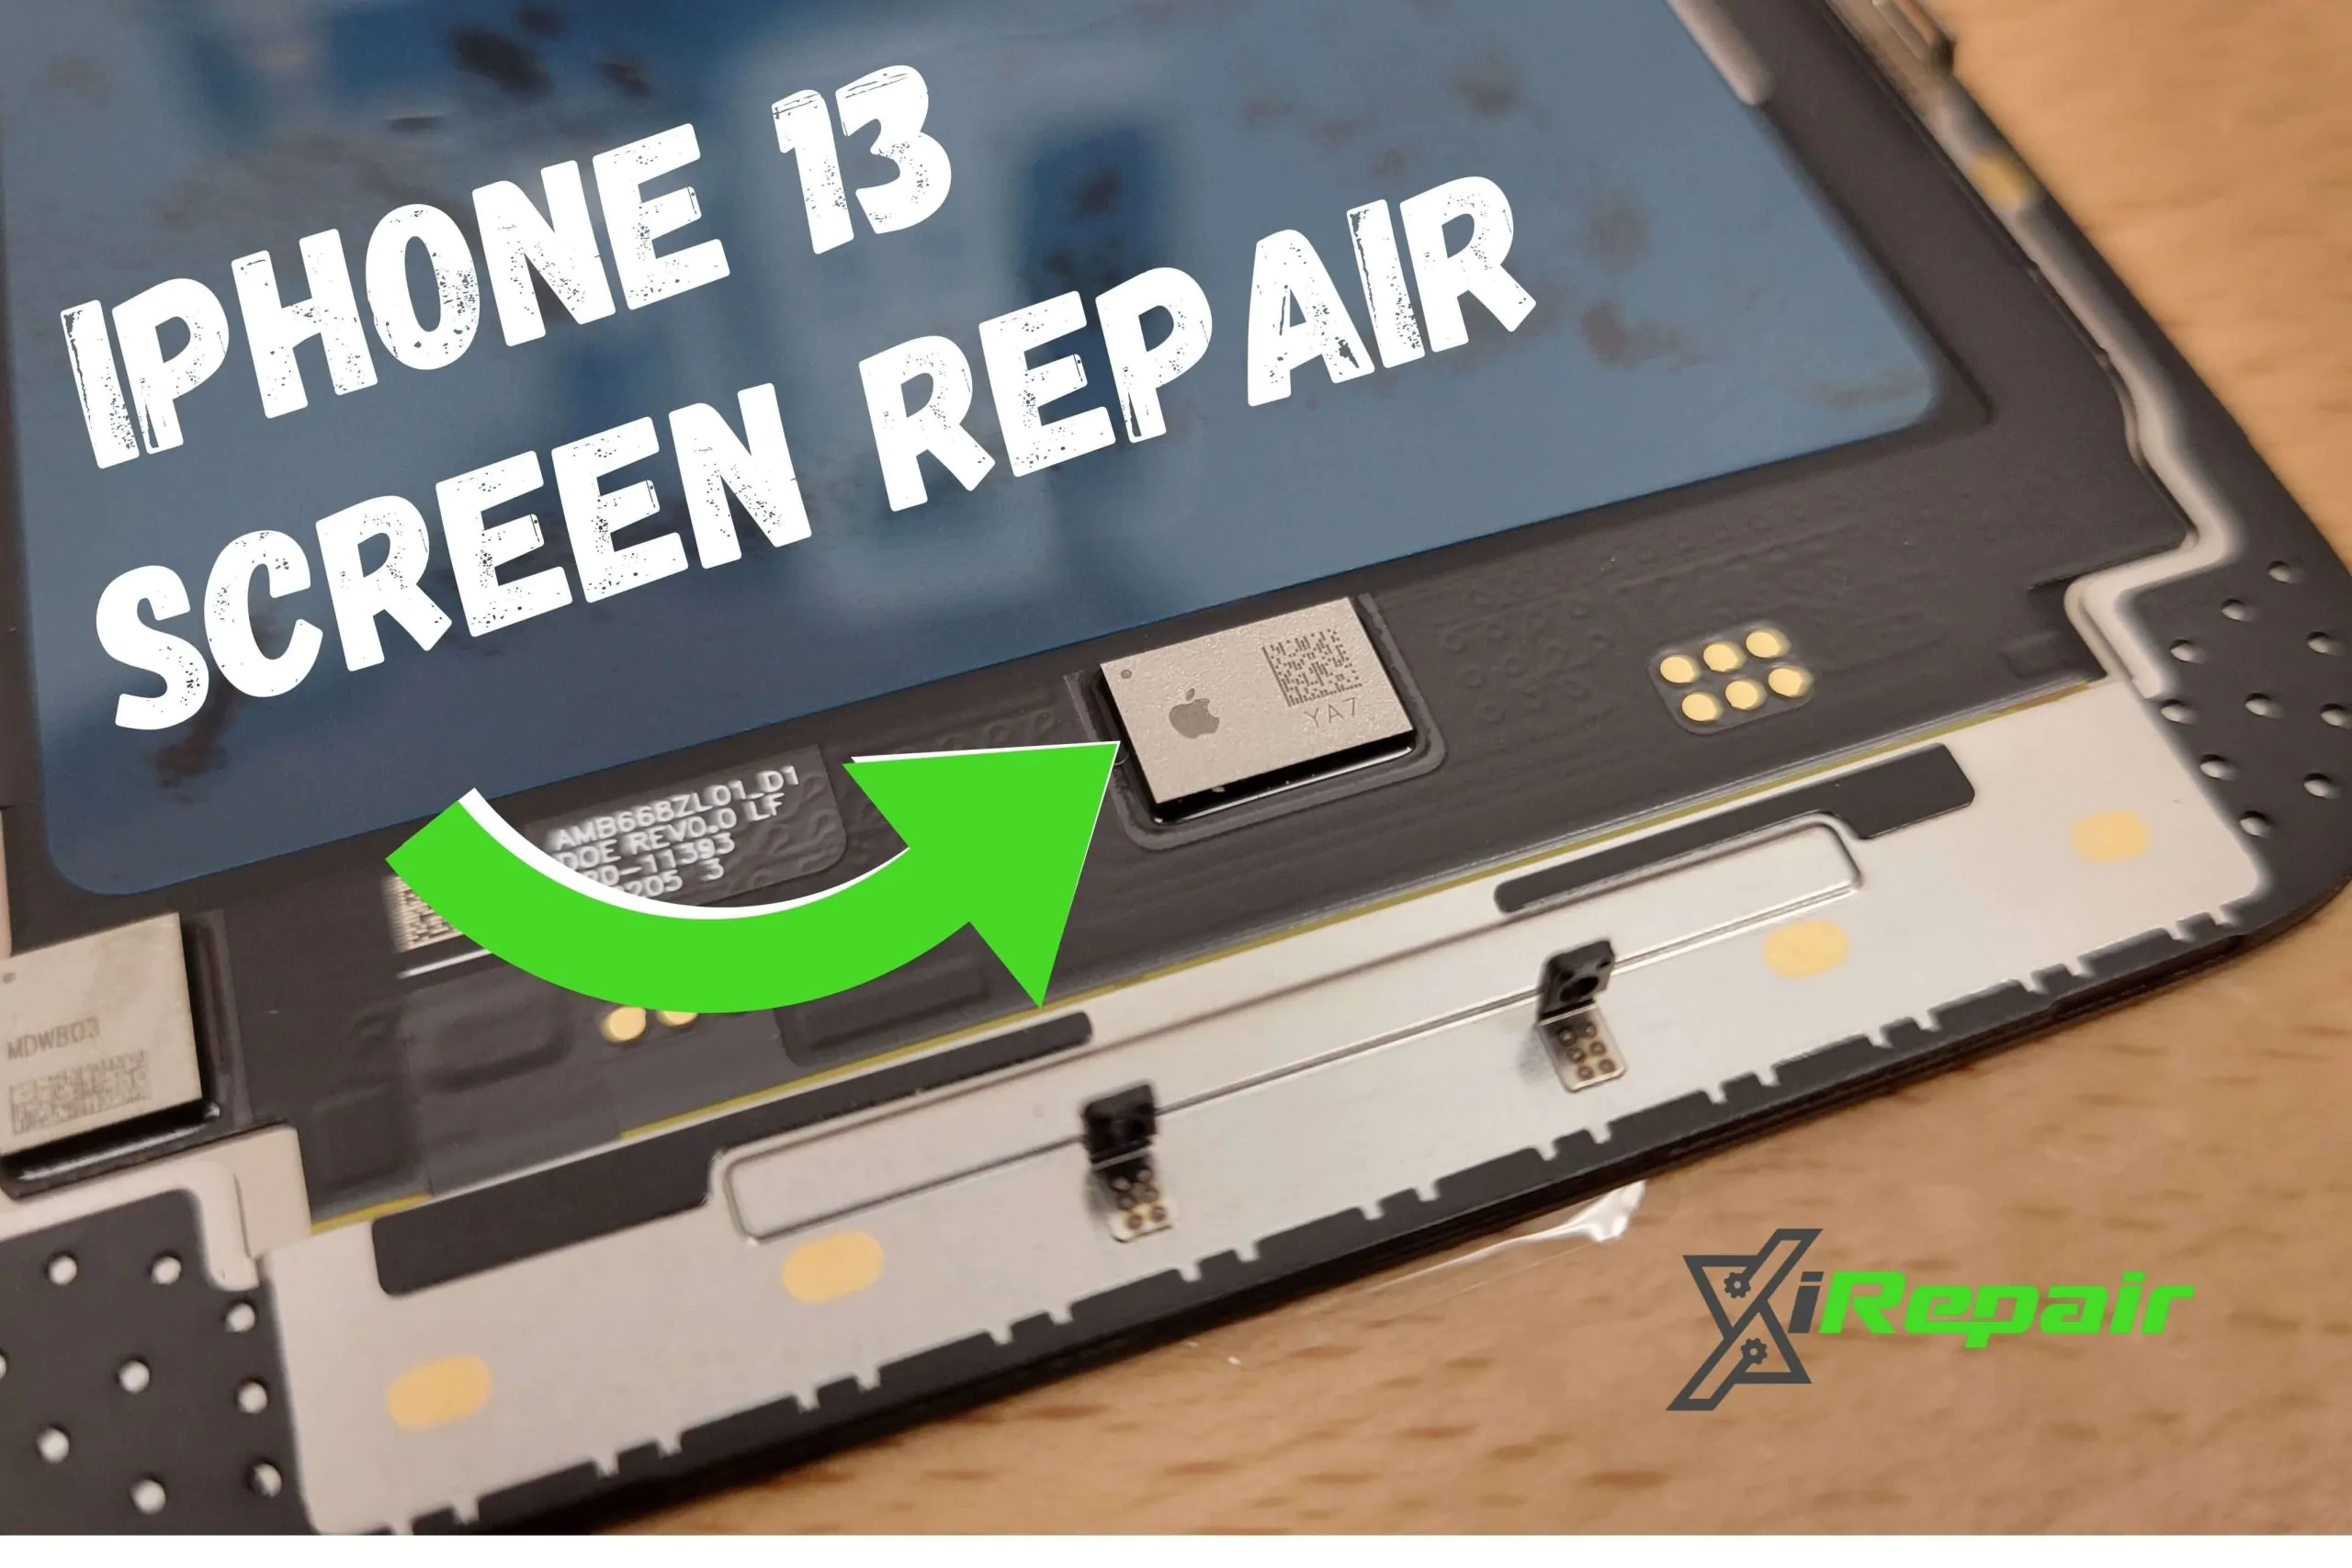 Apple iPhone 11 Pro Cracked Glass Broken LCD Screen Repair Mail In